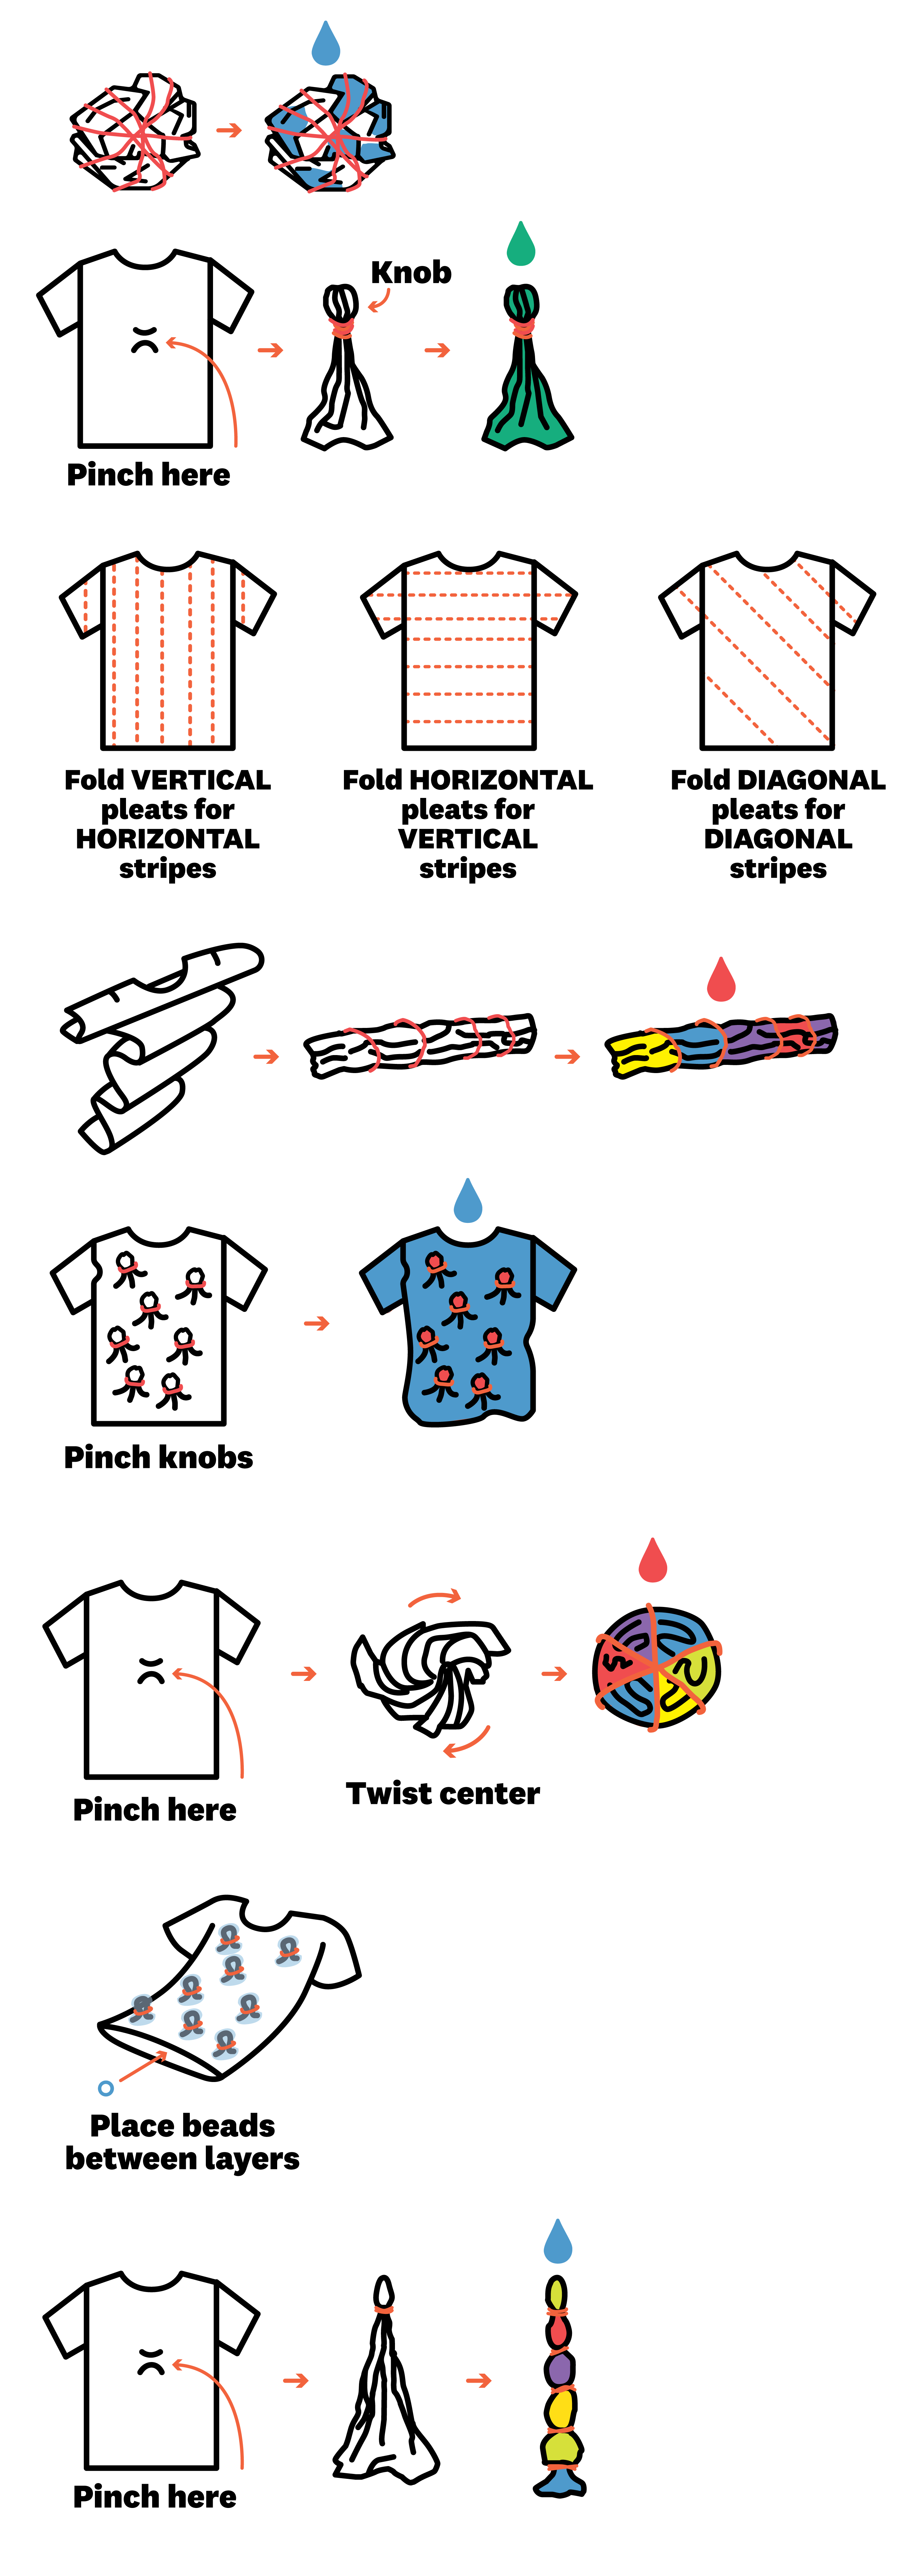 How to tie dye: Your basic guide - Daily Mail